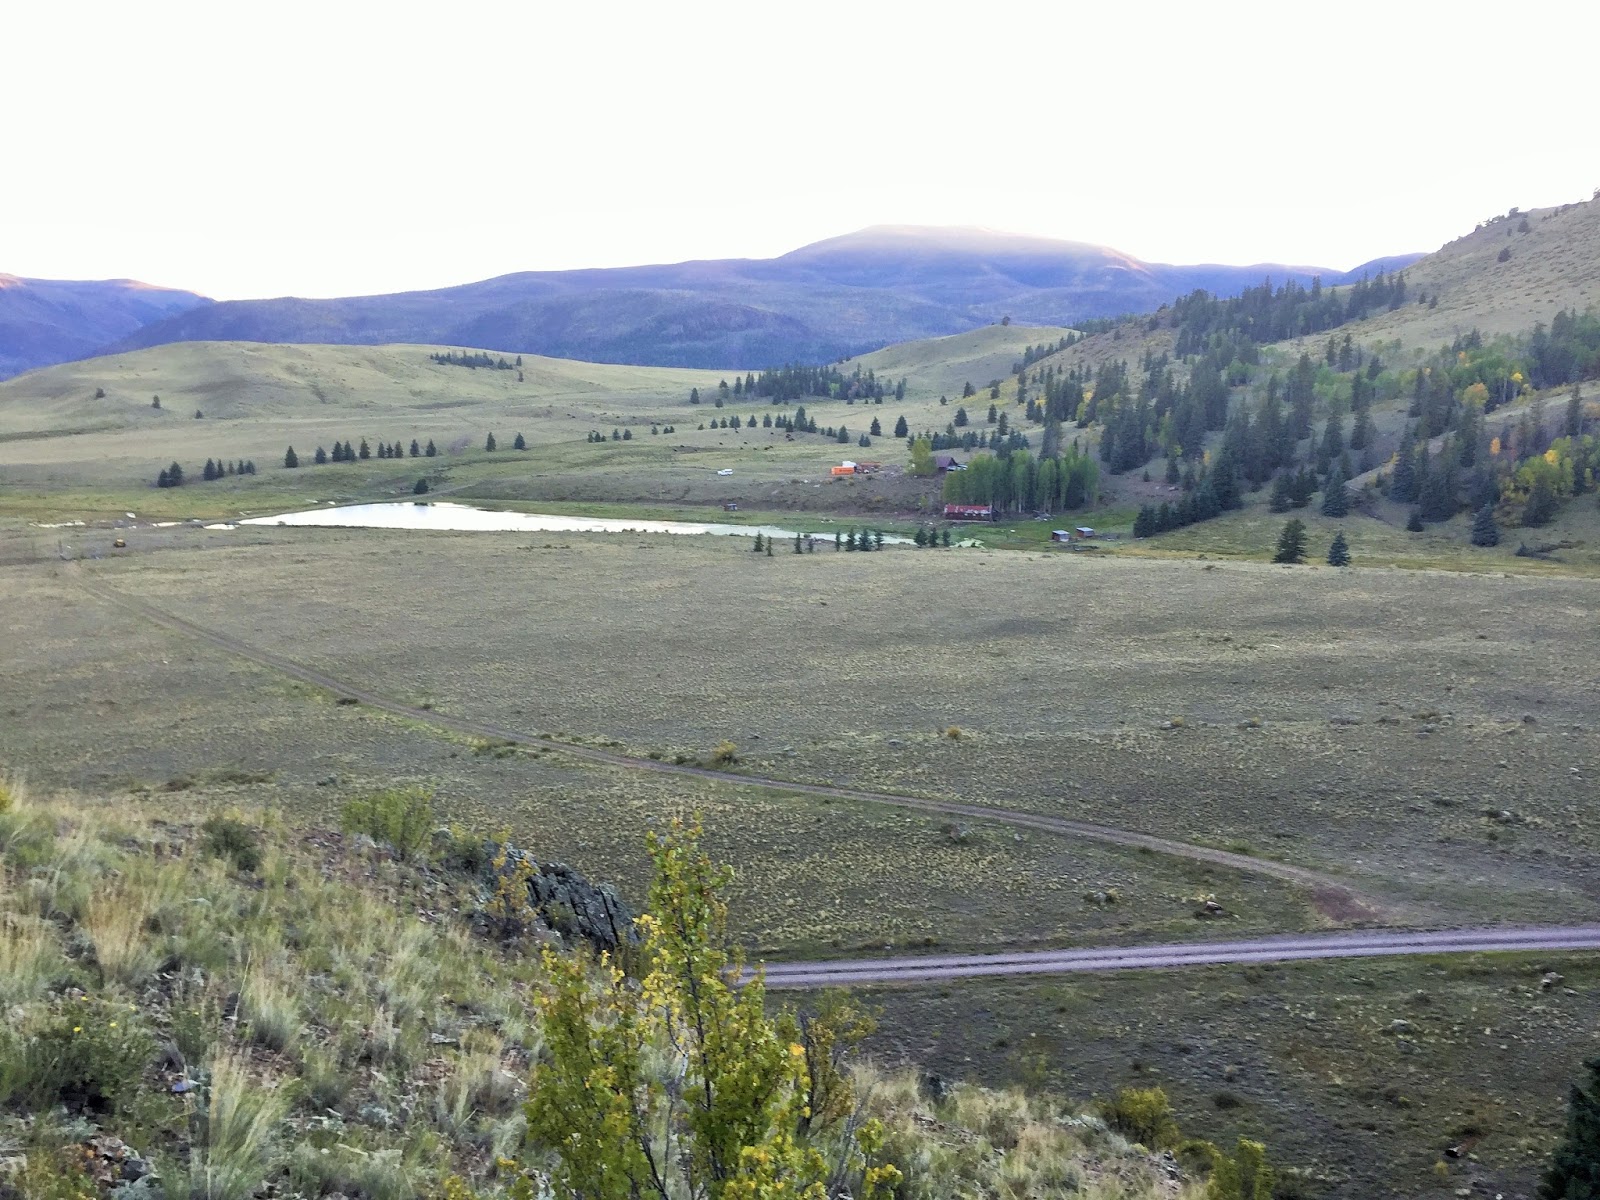 Down The Road Mines And Hiking In Creede Co